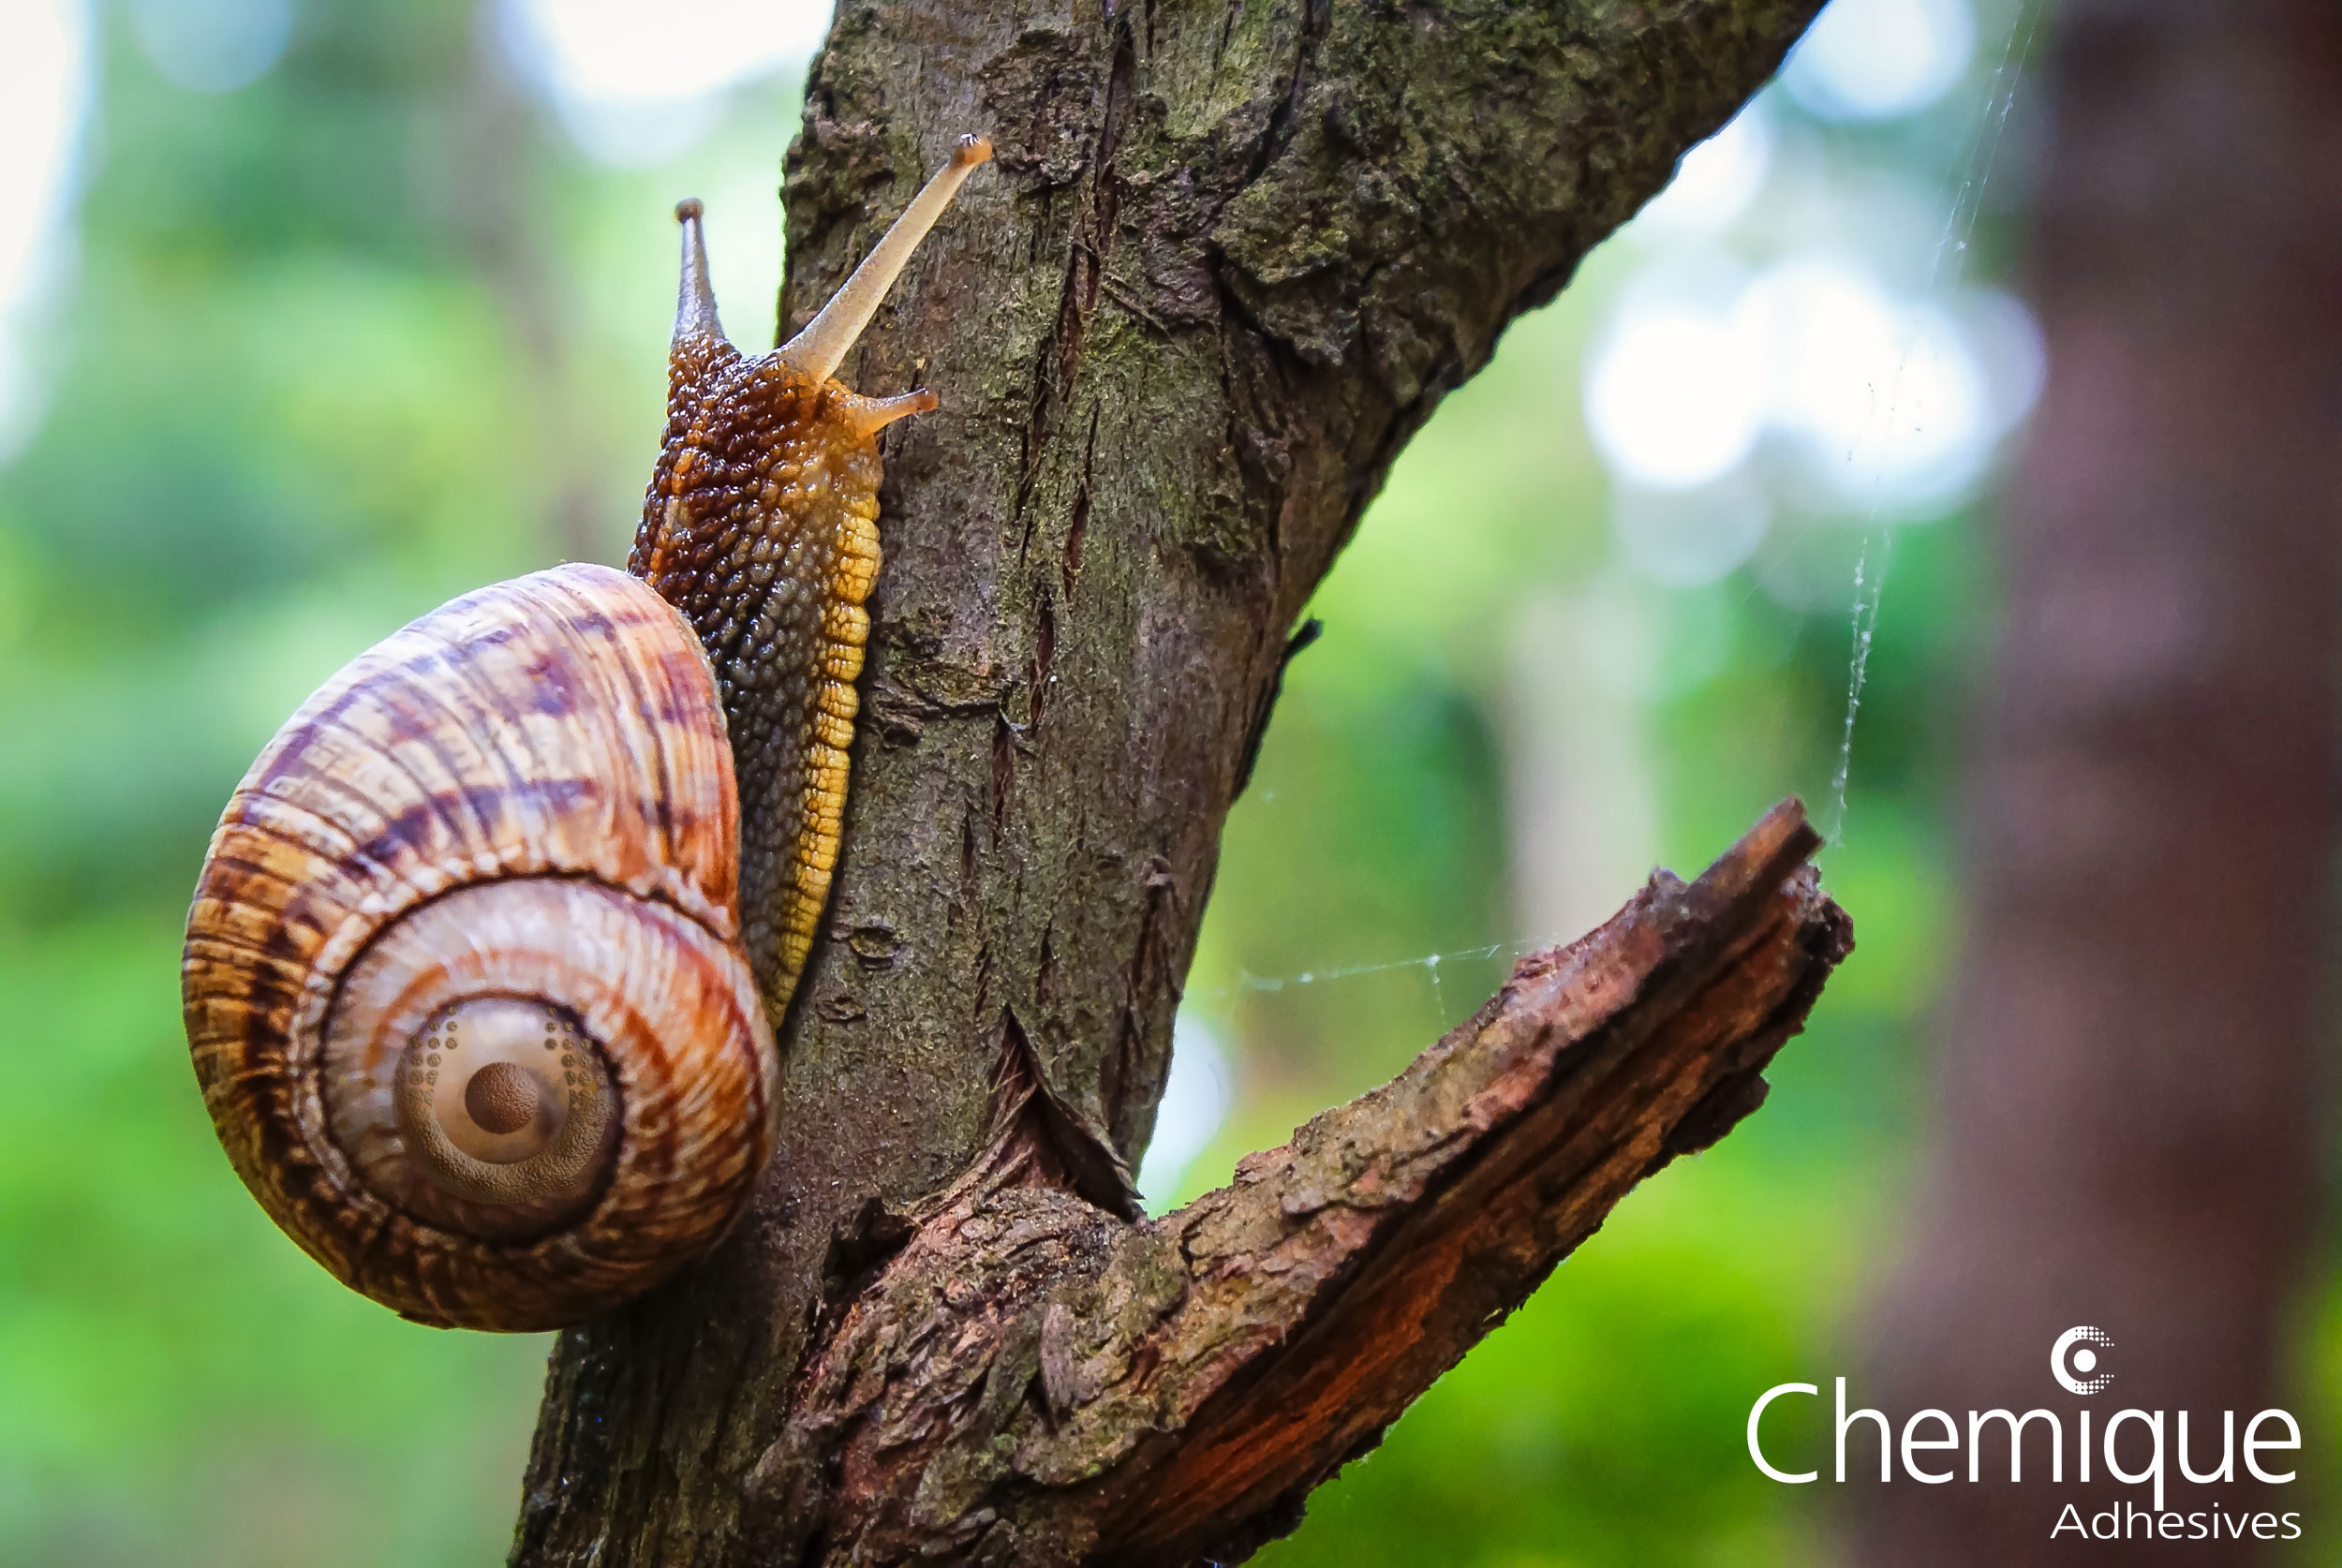 Chemique-Adhesives-Blog---Reversible-Adhesives-Snail-Slime